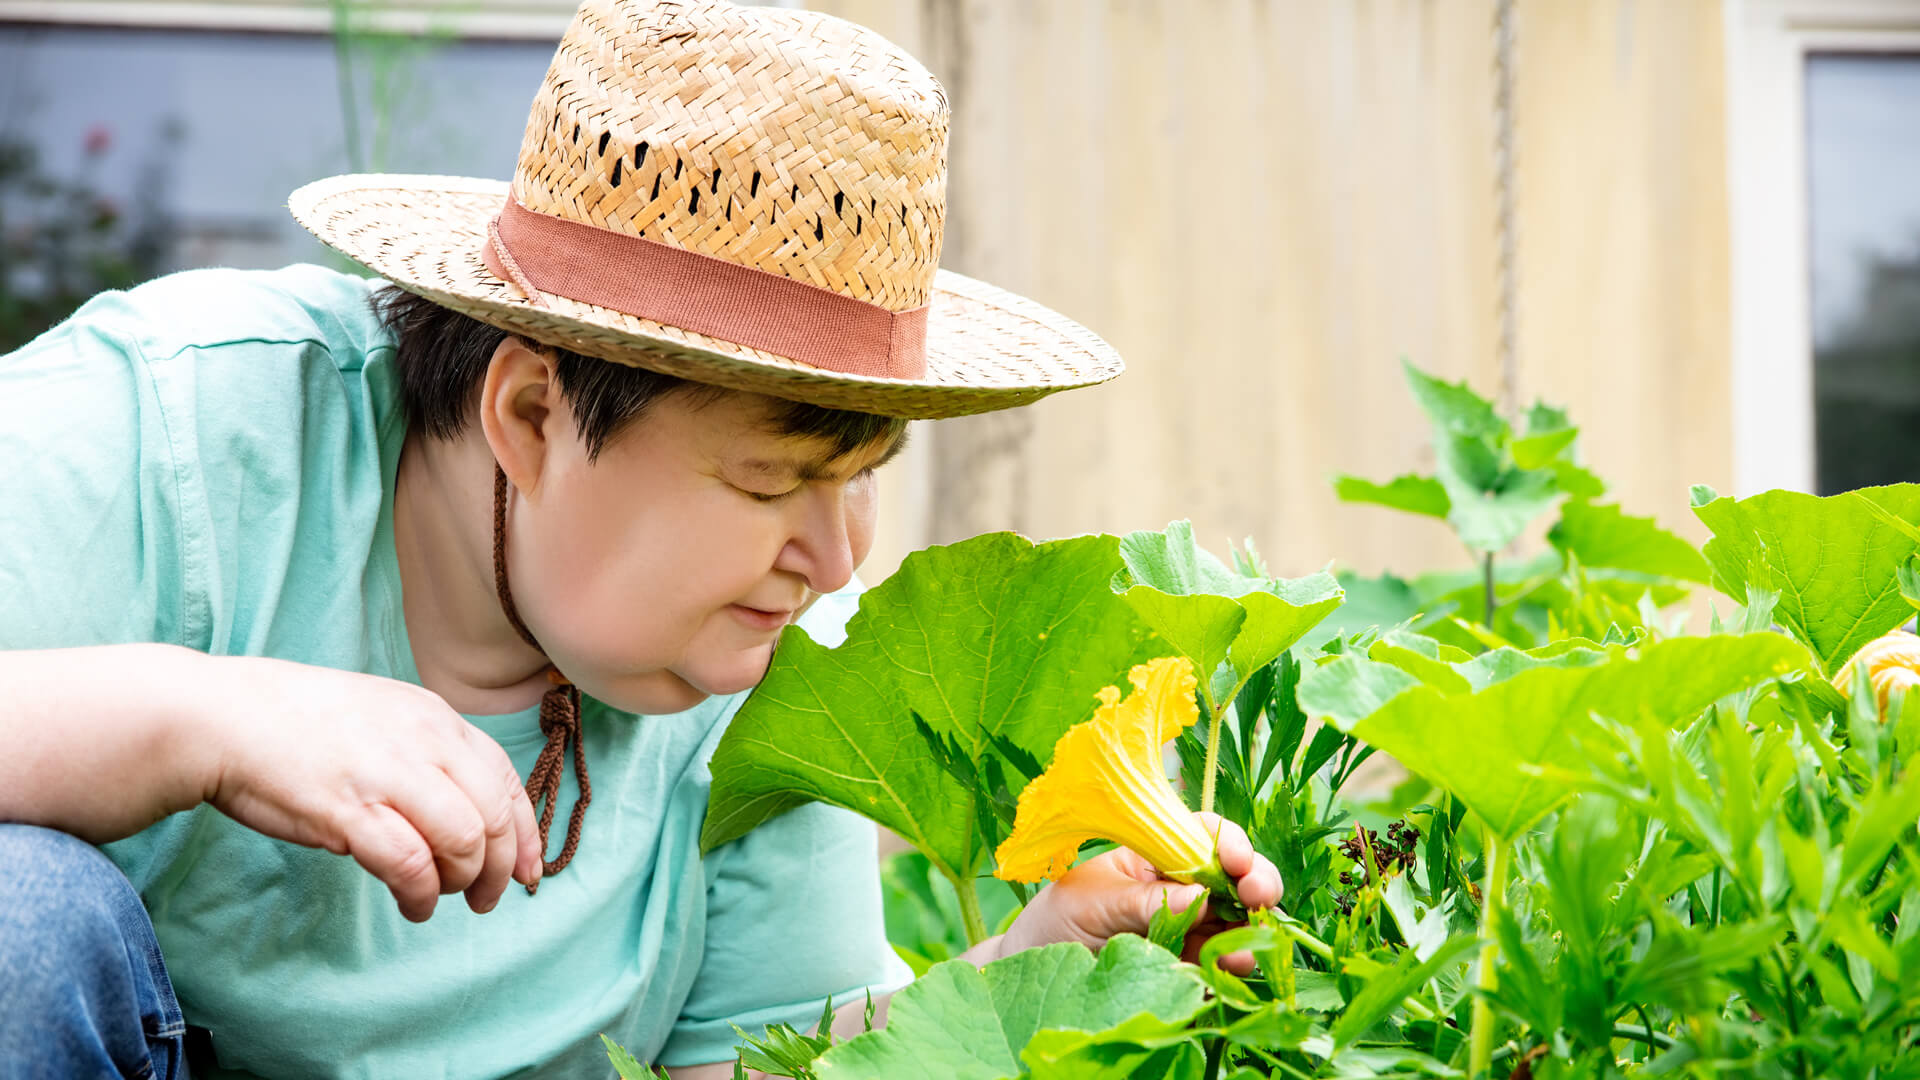 Person in straw hat examining squash plants in a garden.